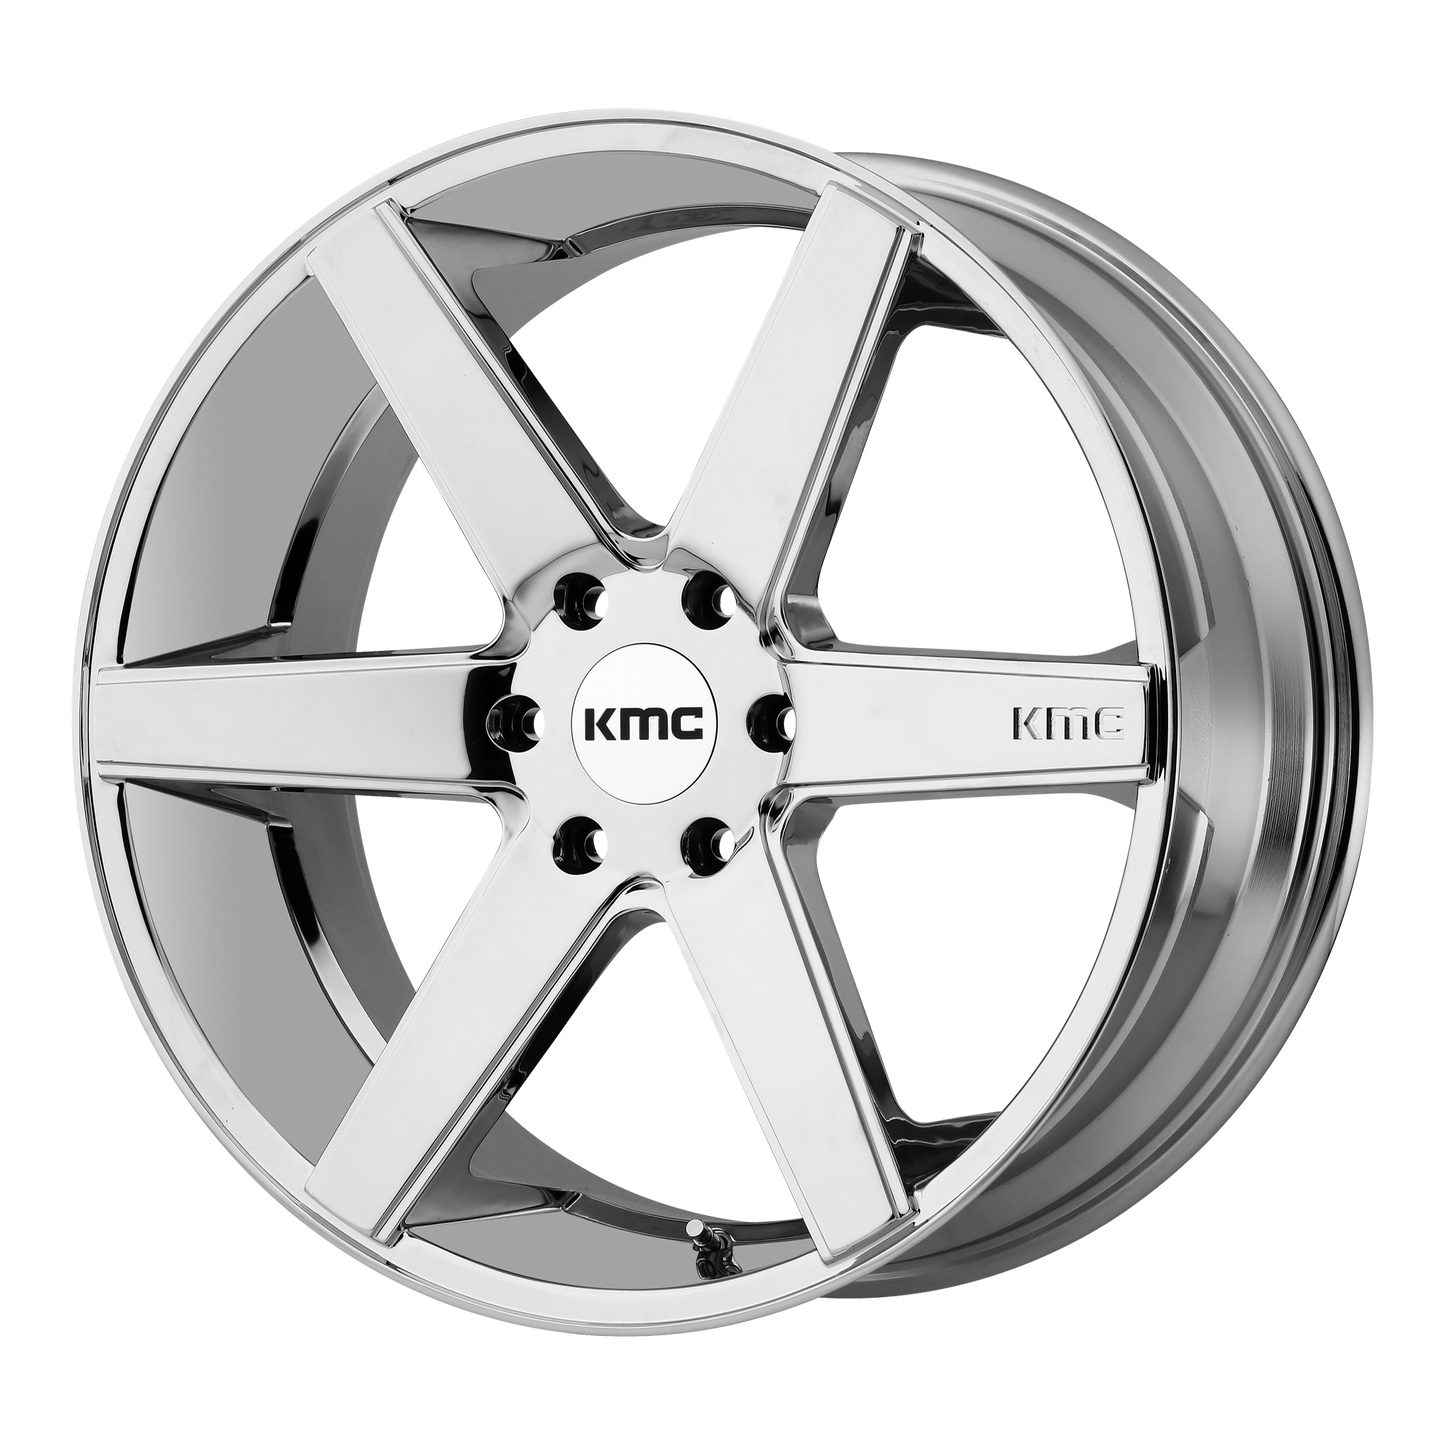 Kmc Km704 District Truck 20x8.5 20x8.5 45 Offset In Pvd